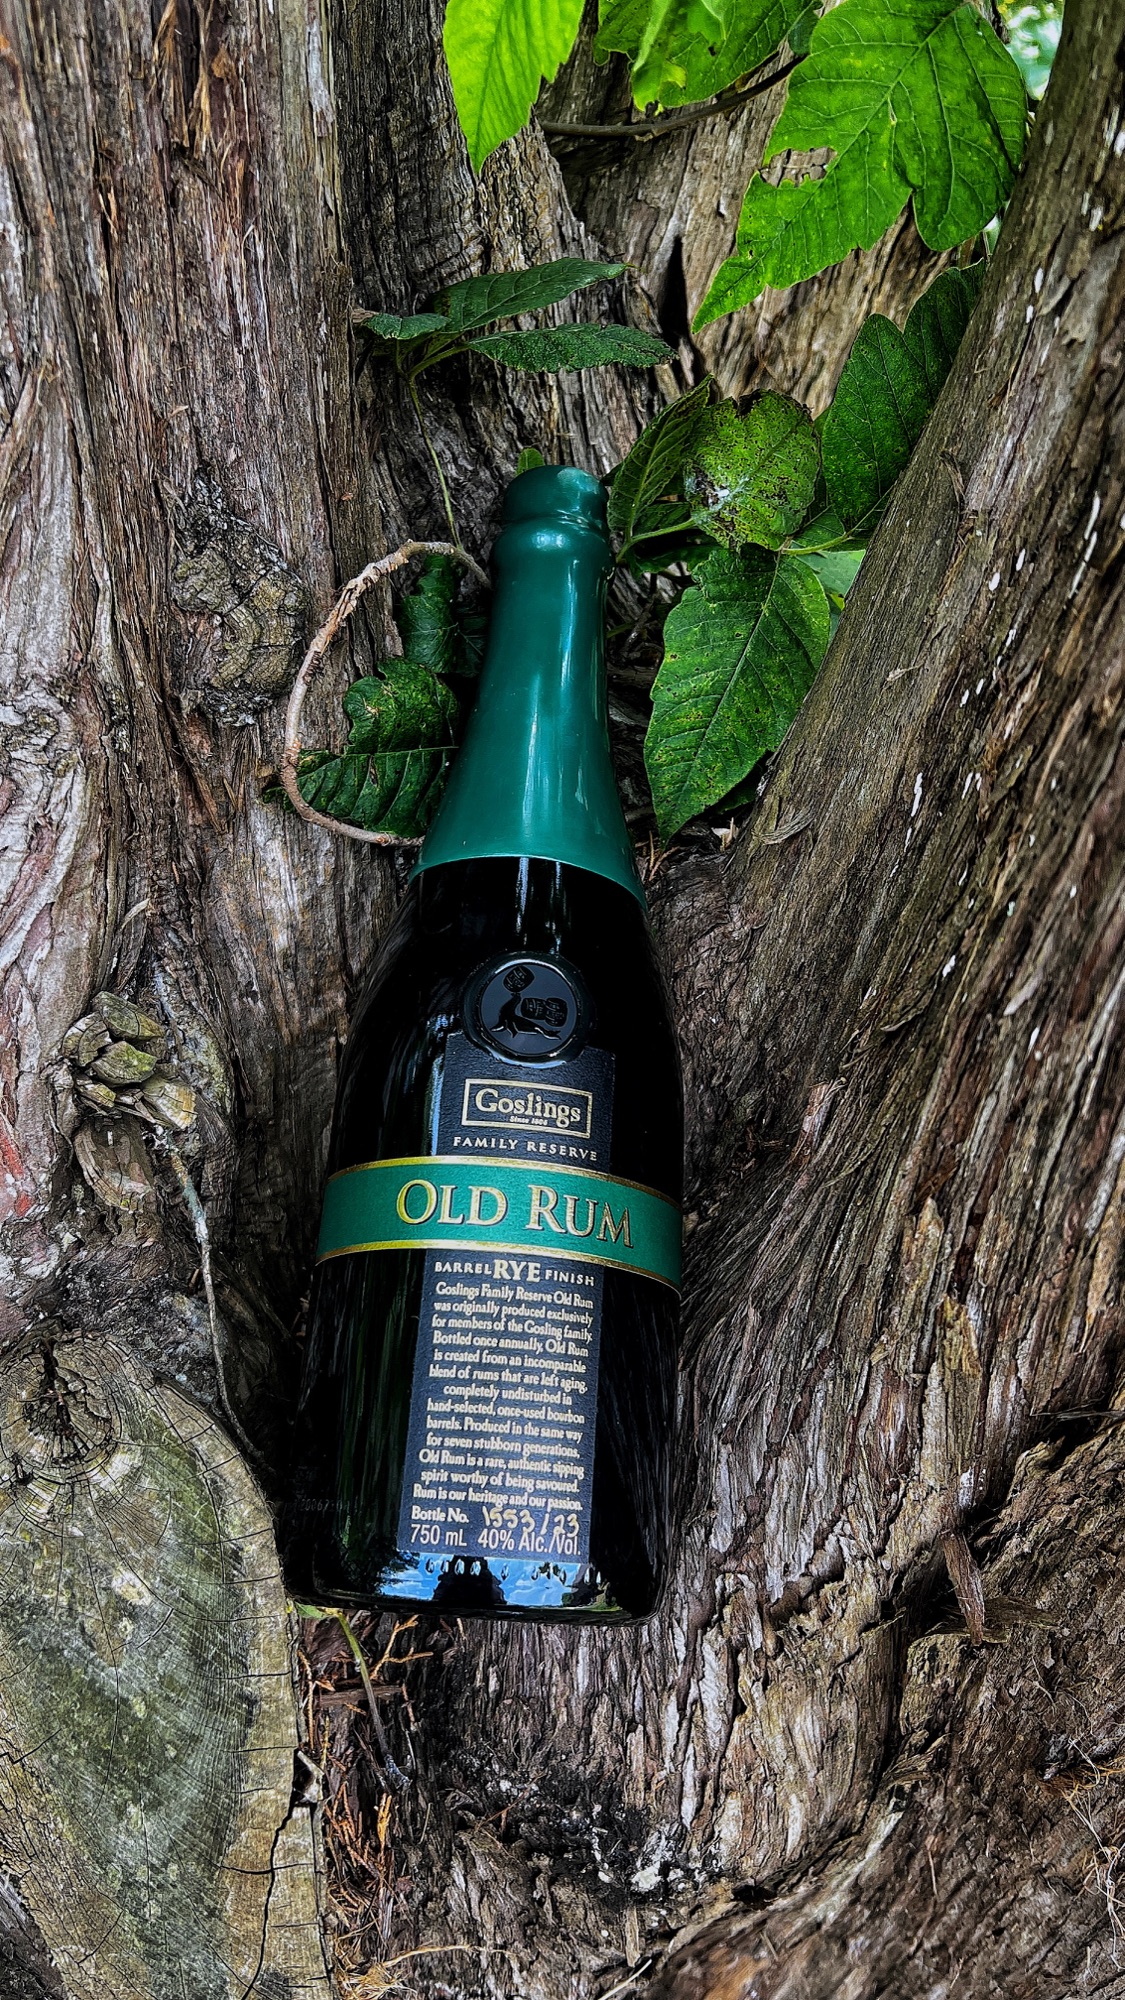 Goslings Old Rums are the Sips of the Summer